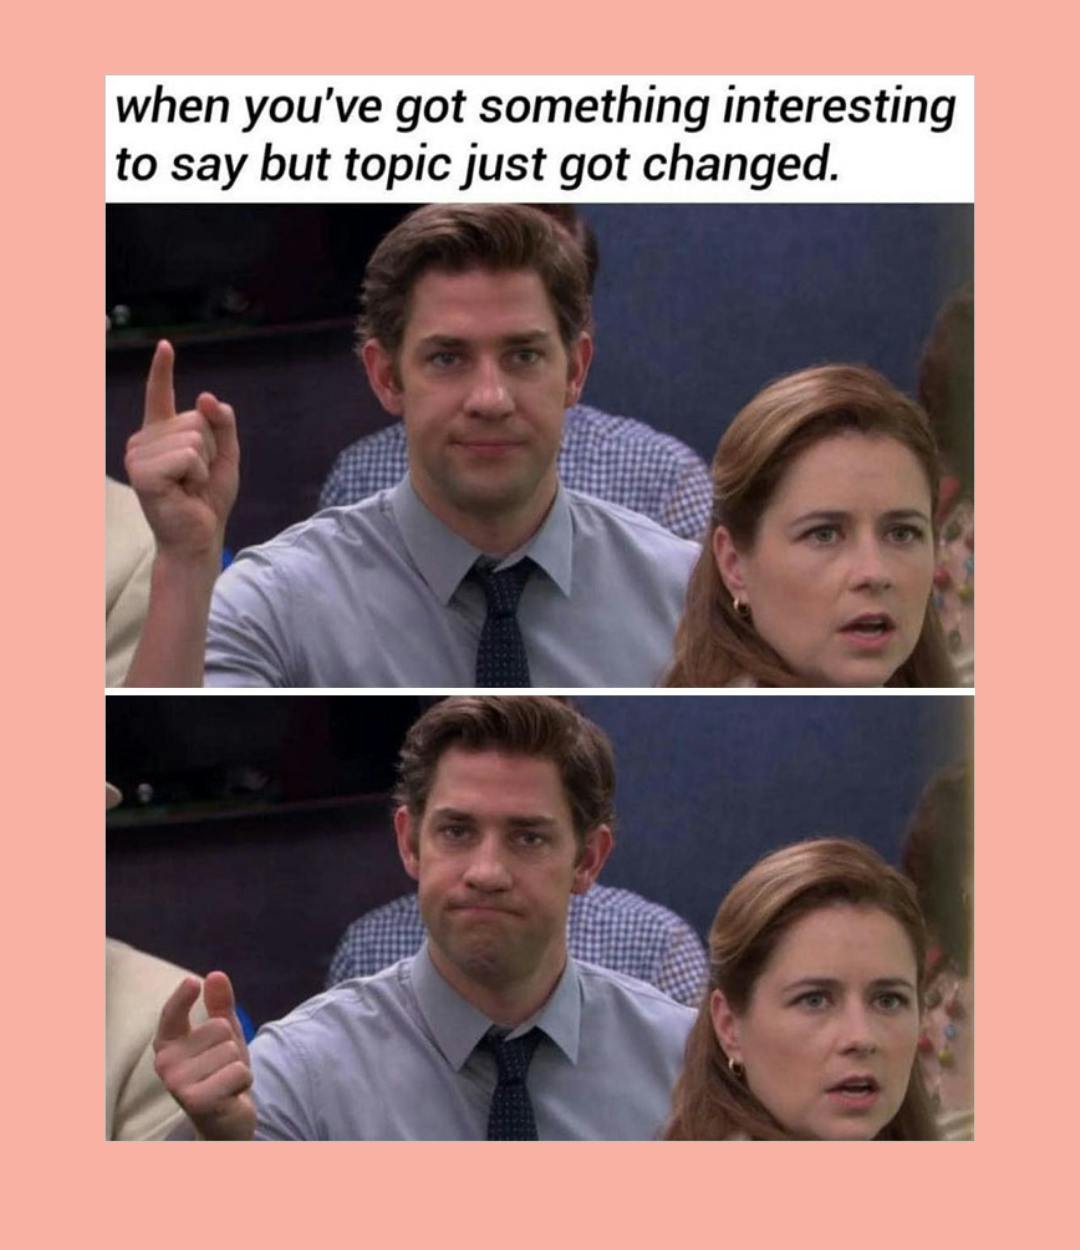 Meme from The Office showing "when you've got something interesting to say but topic just got changed"